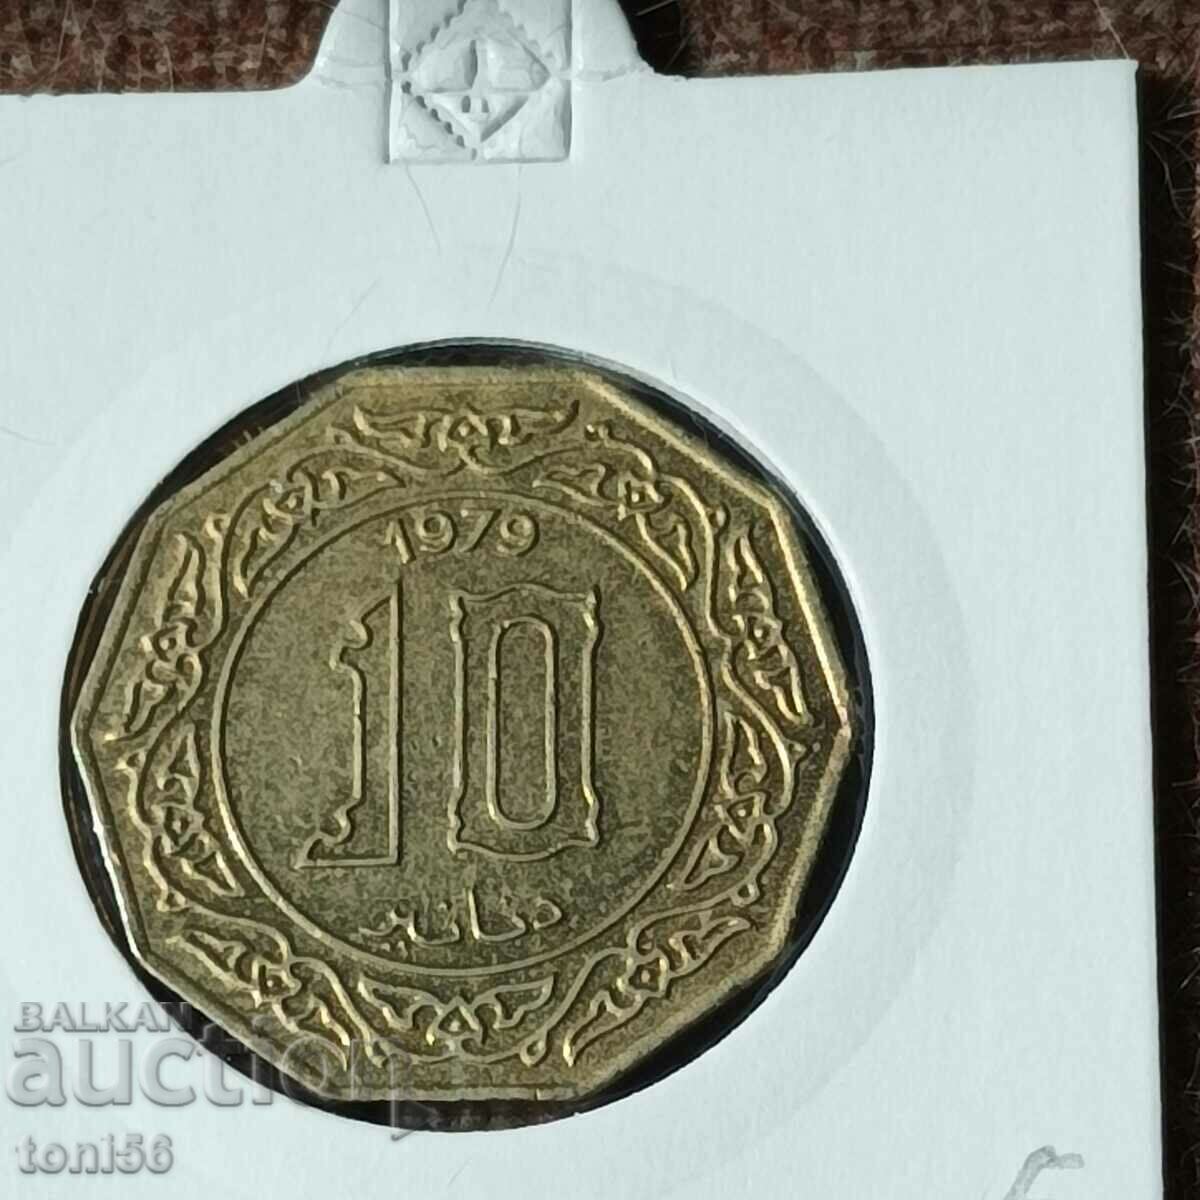 Algeria 10 Dinars 1979 UNC from a collection